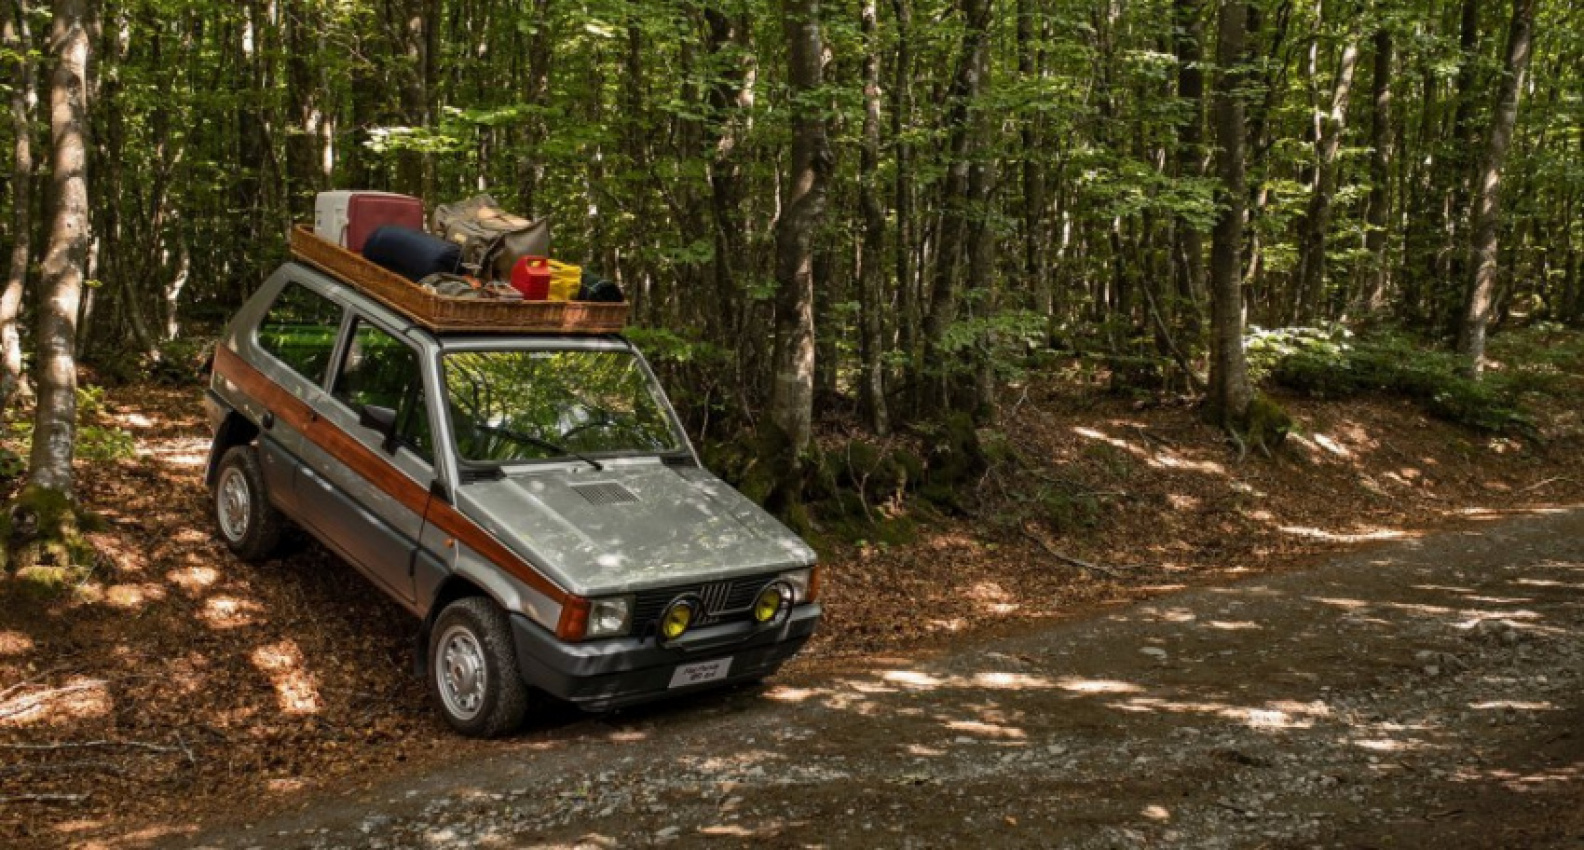 autos, cars, fiat, join the custom fiat panda 4x4s movement with these creative restomods